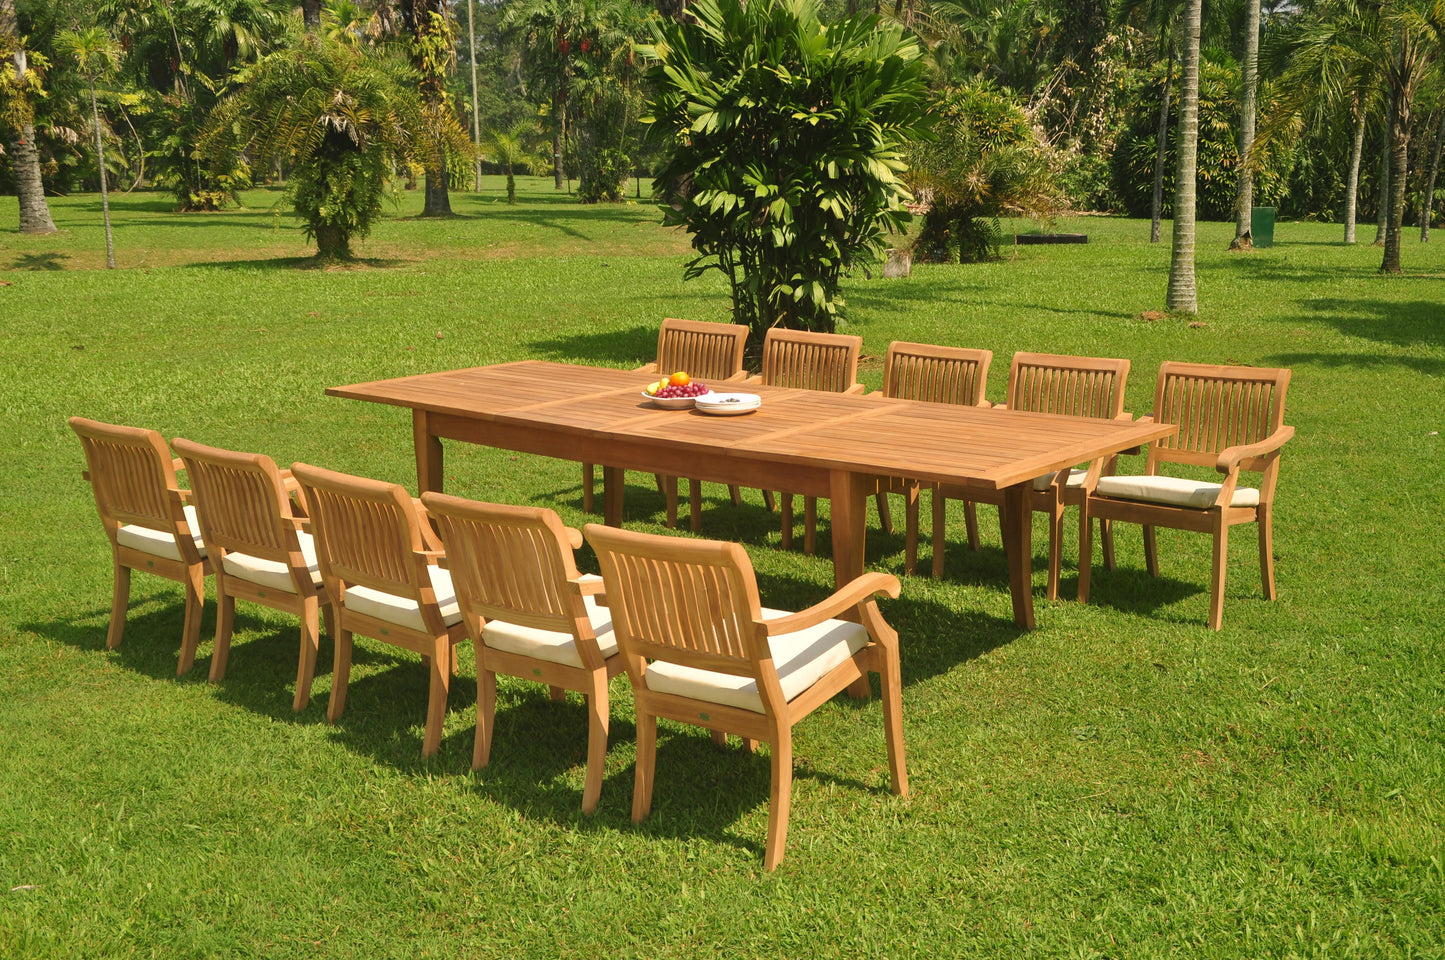 122" Atnas Dining Table with Arbor Arm Chairs